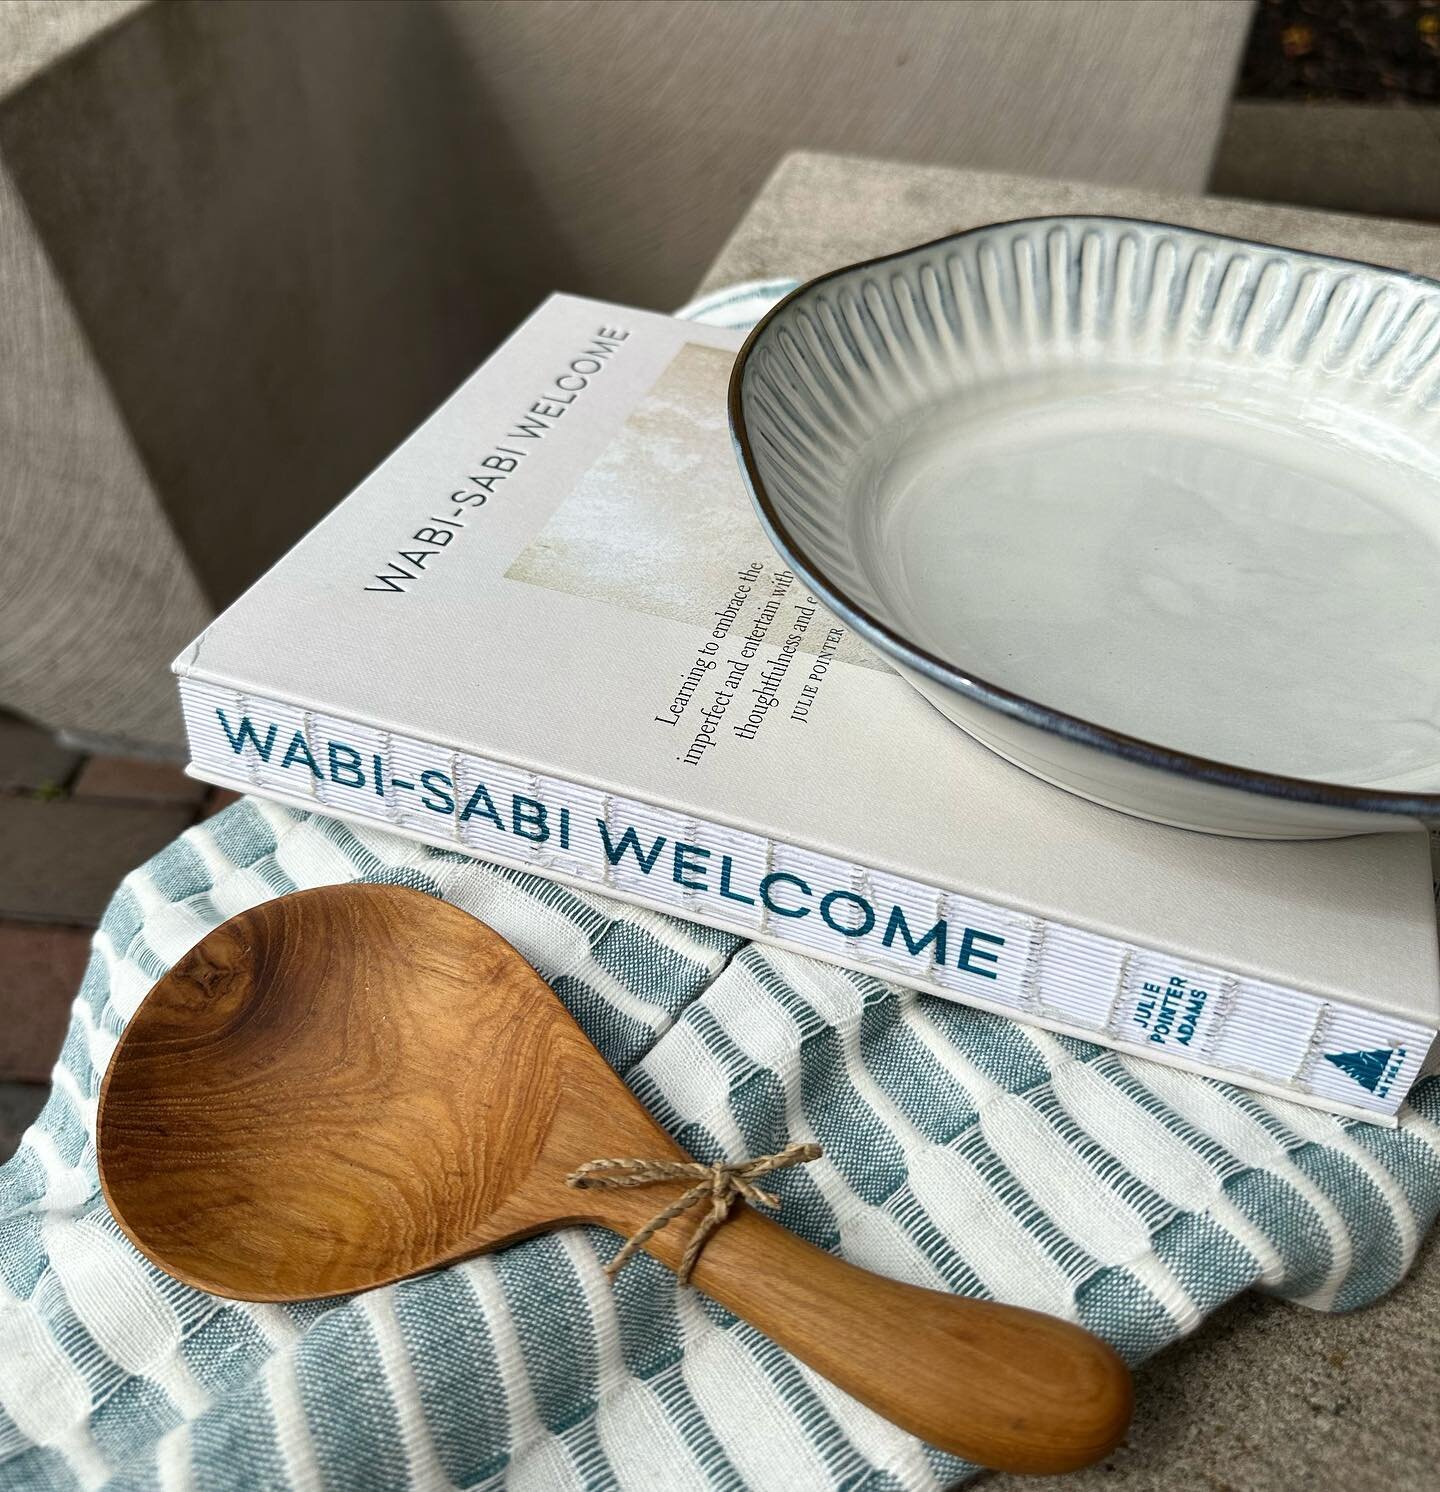 Wabi-sabi is the view or thought of finding beauty in every aspect of imperfection in nature. It is about the aesthetic of things in existence, that are &ldquo;imperfect, impermanent, and incomplete&rdquo;